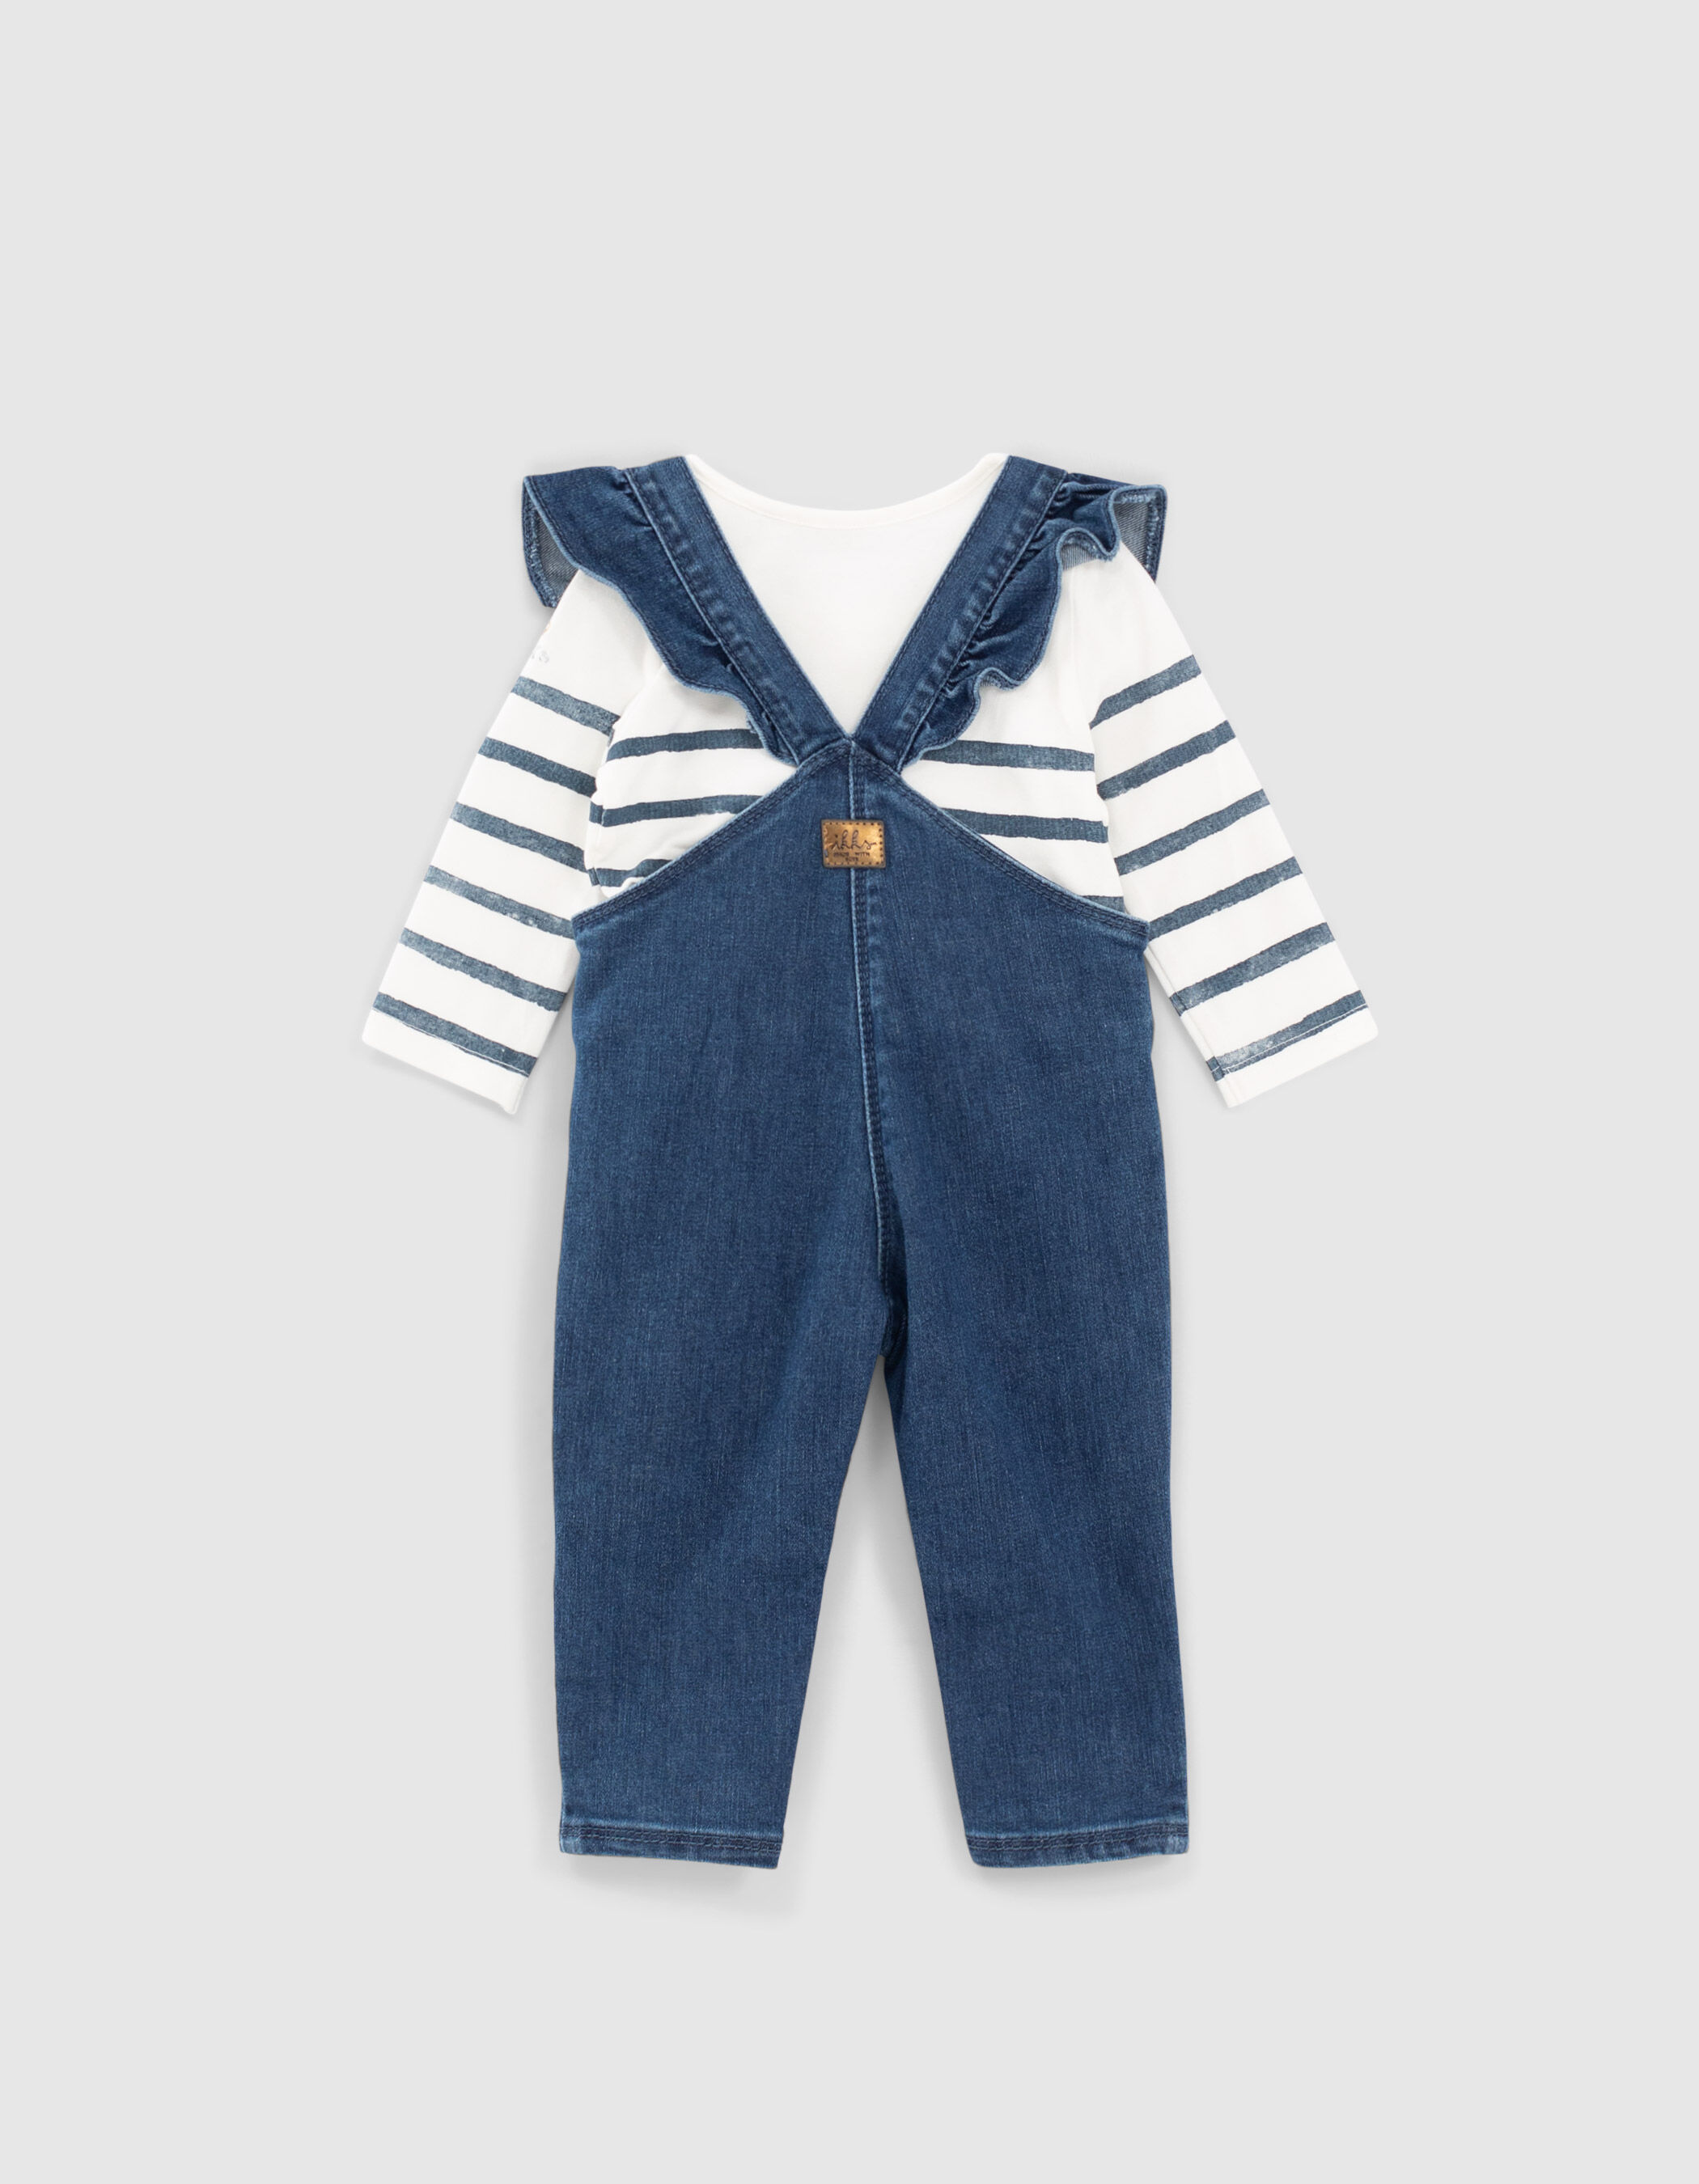 discount 89% Obaibi jumpsuit KIDS FASHION Baby Jumpsuits & Dungarees Print Navy Blue 6Y 